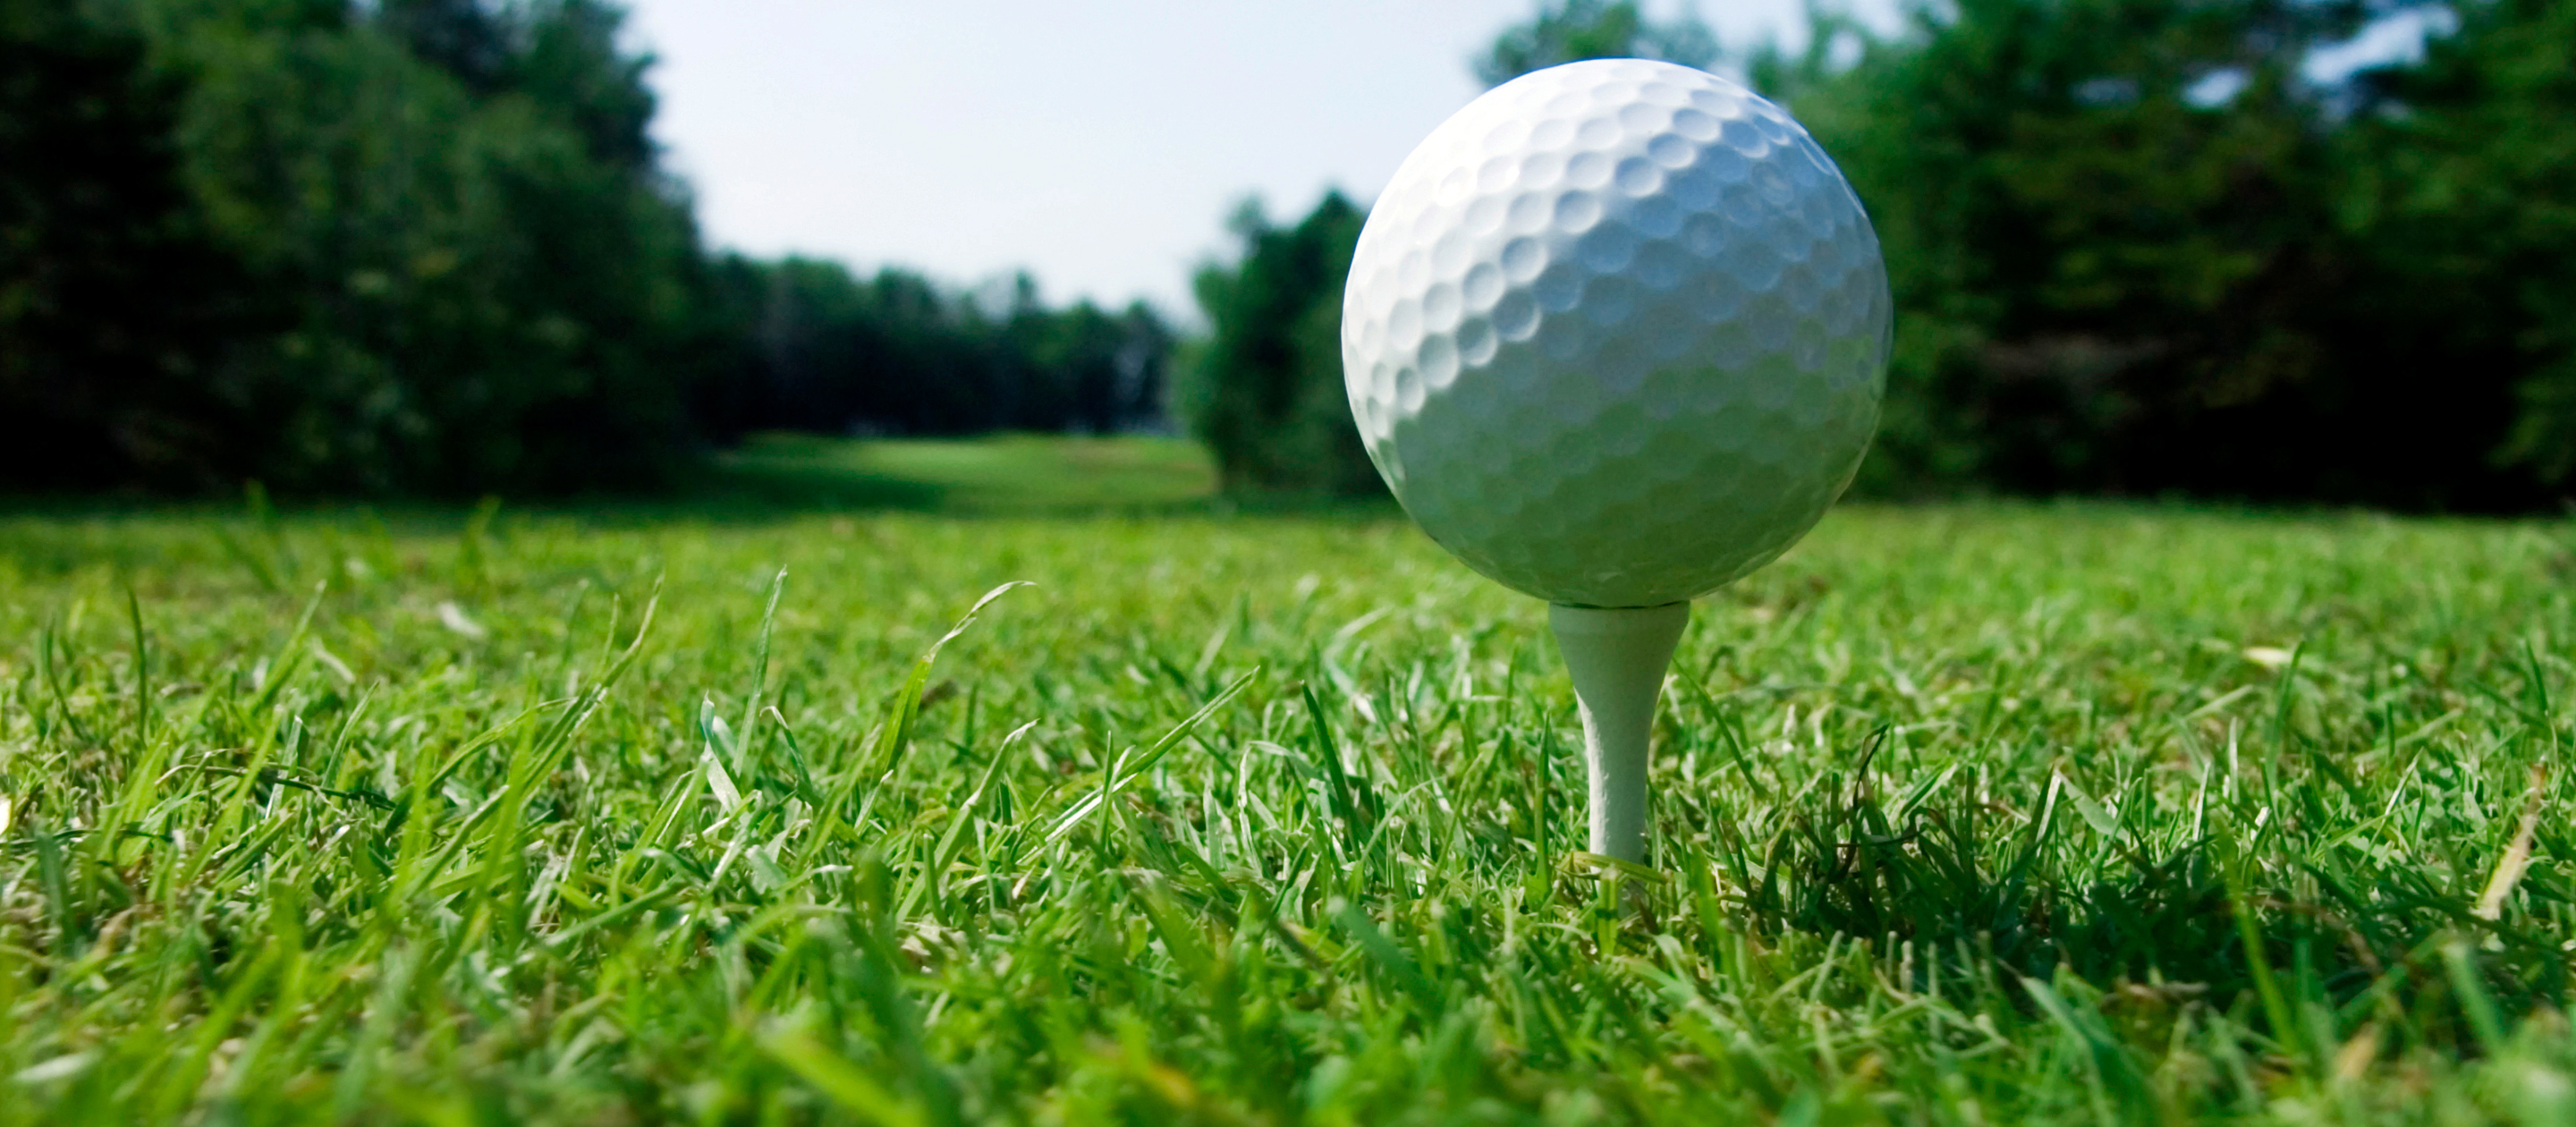 close-up of a golf ball on a tee surrounded by green grass